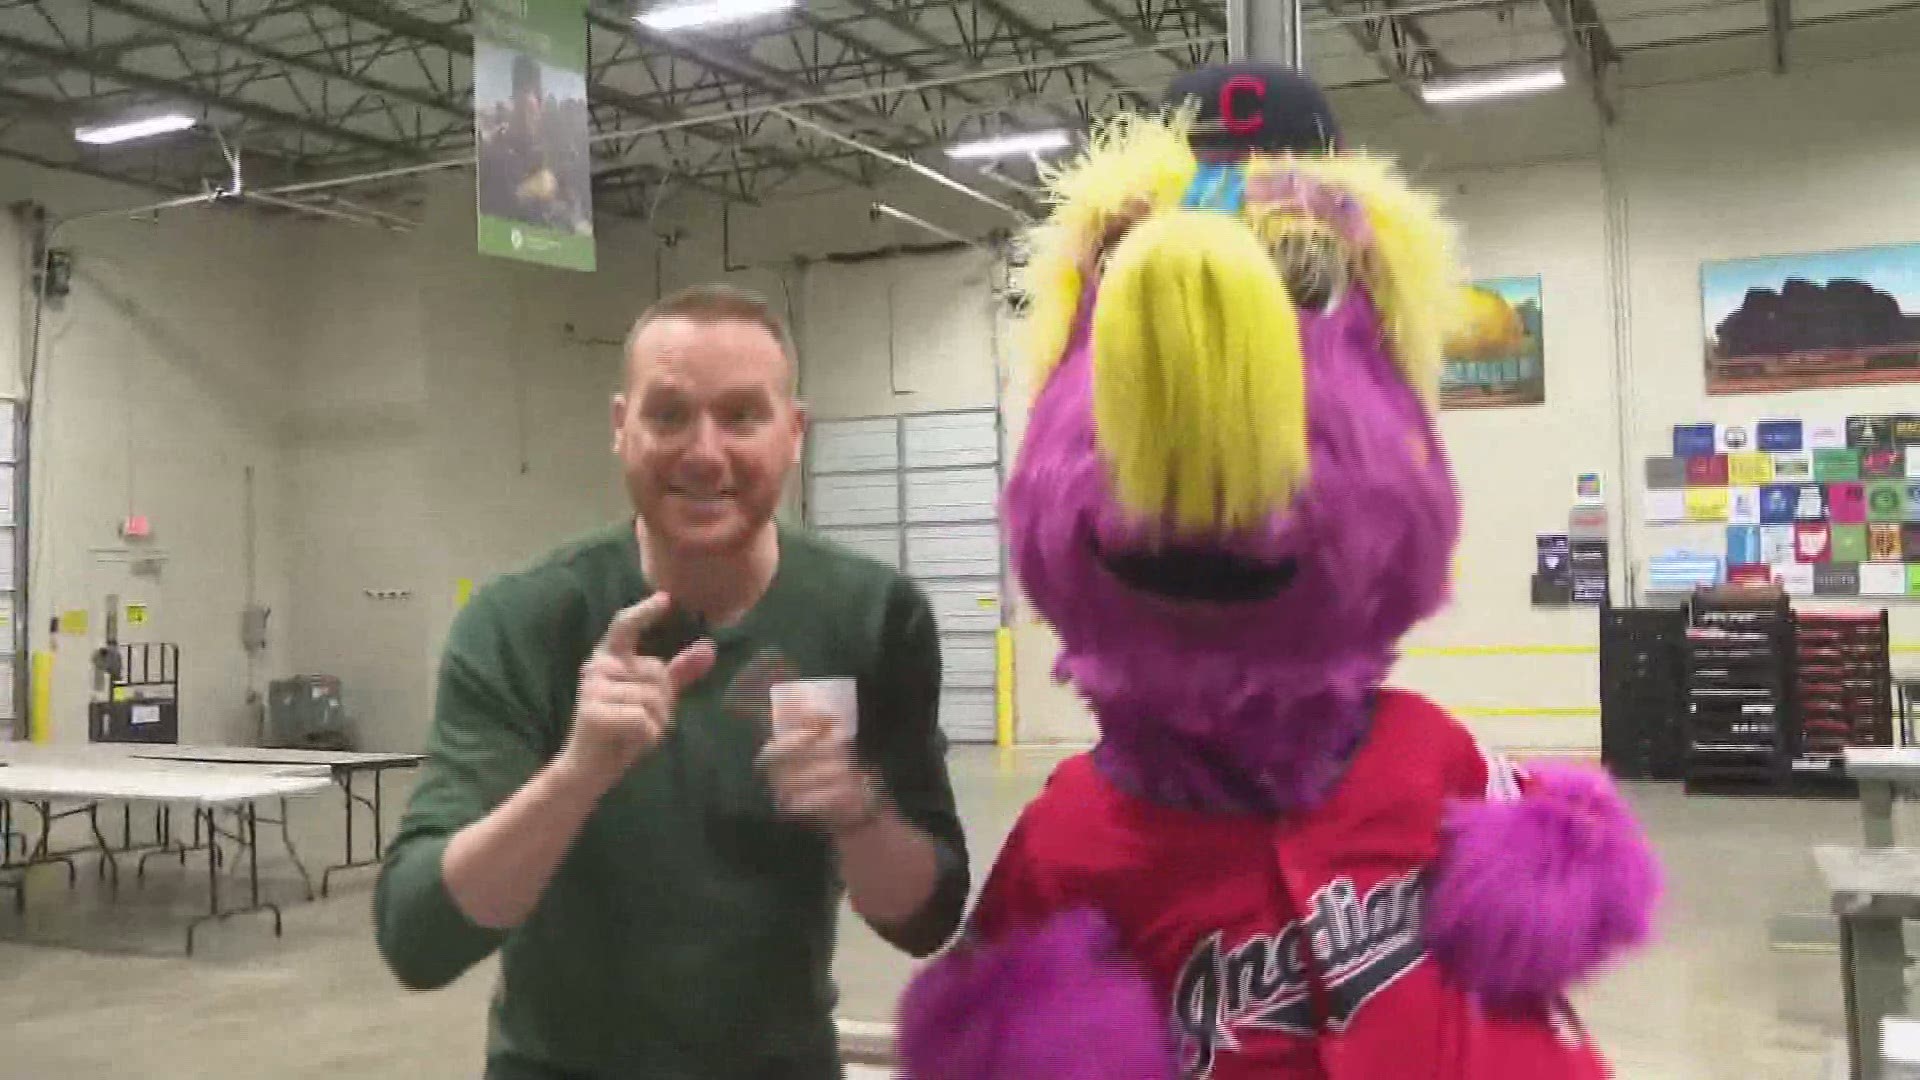 3News' Mike Polk Jr. was a celebrity guest in the 'Supermarket Challenge' to mark the official kickoff of Harvest for Hunger. He teamed up with Slider the mascot.